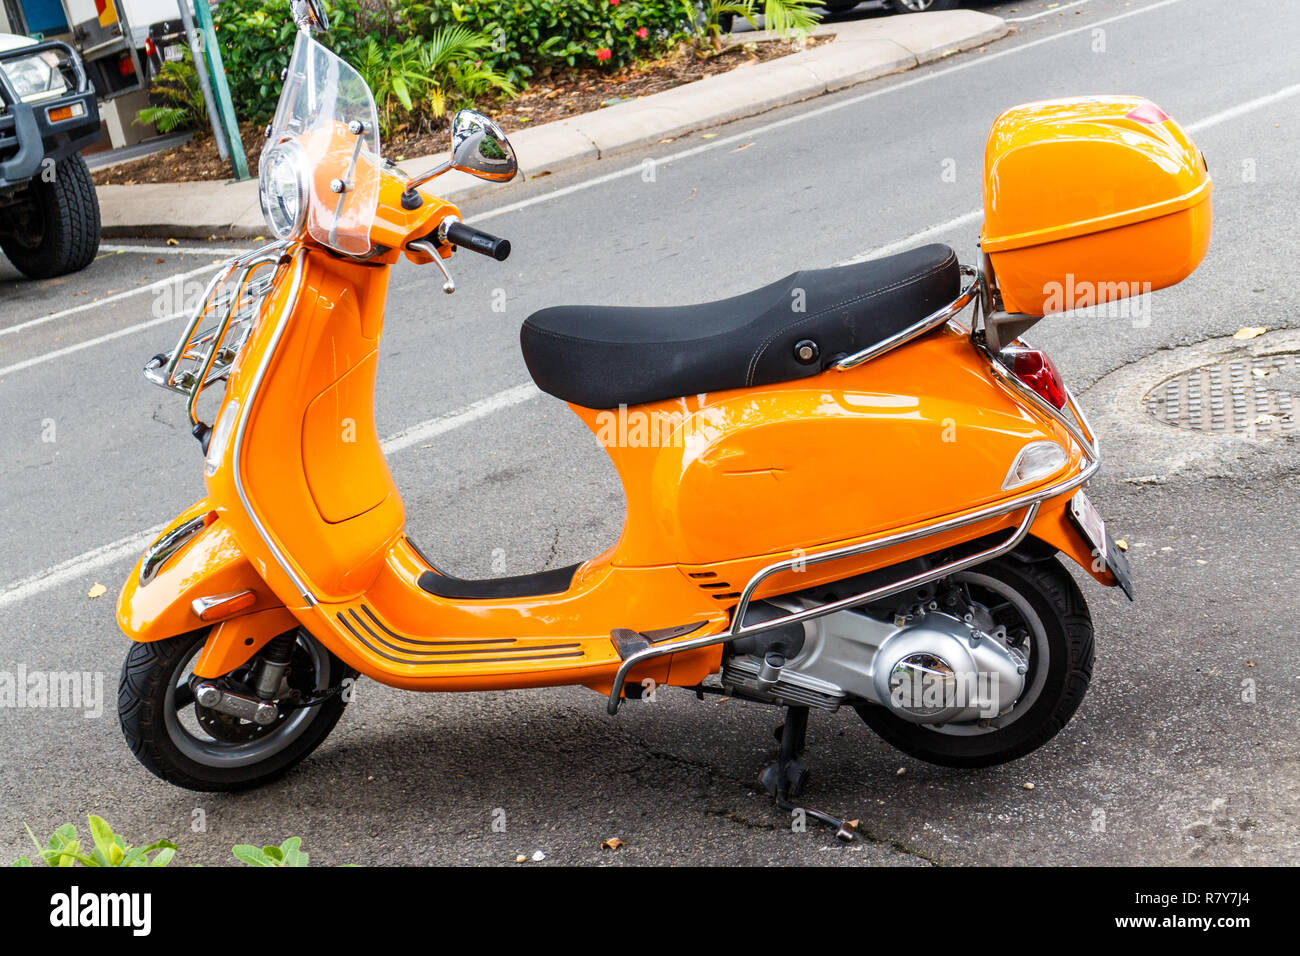 Bright orange coloured scooter parked on street Stock Photo - Alamy